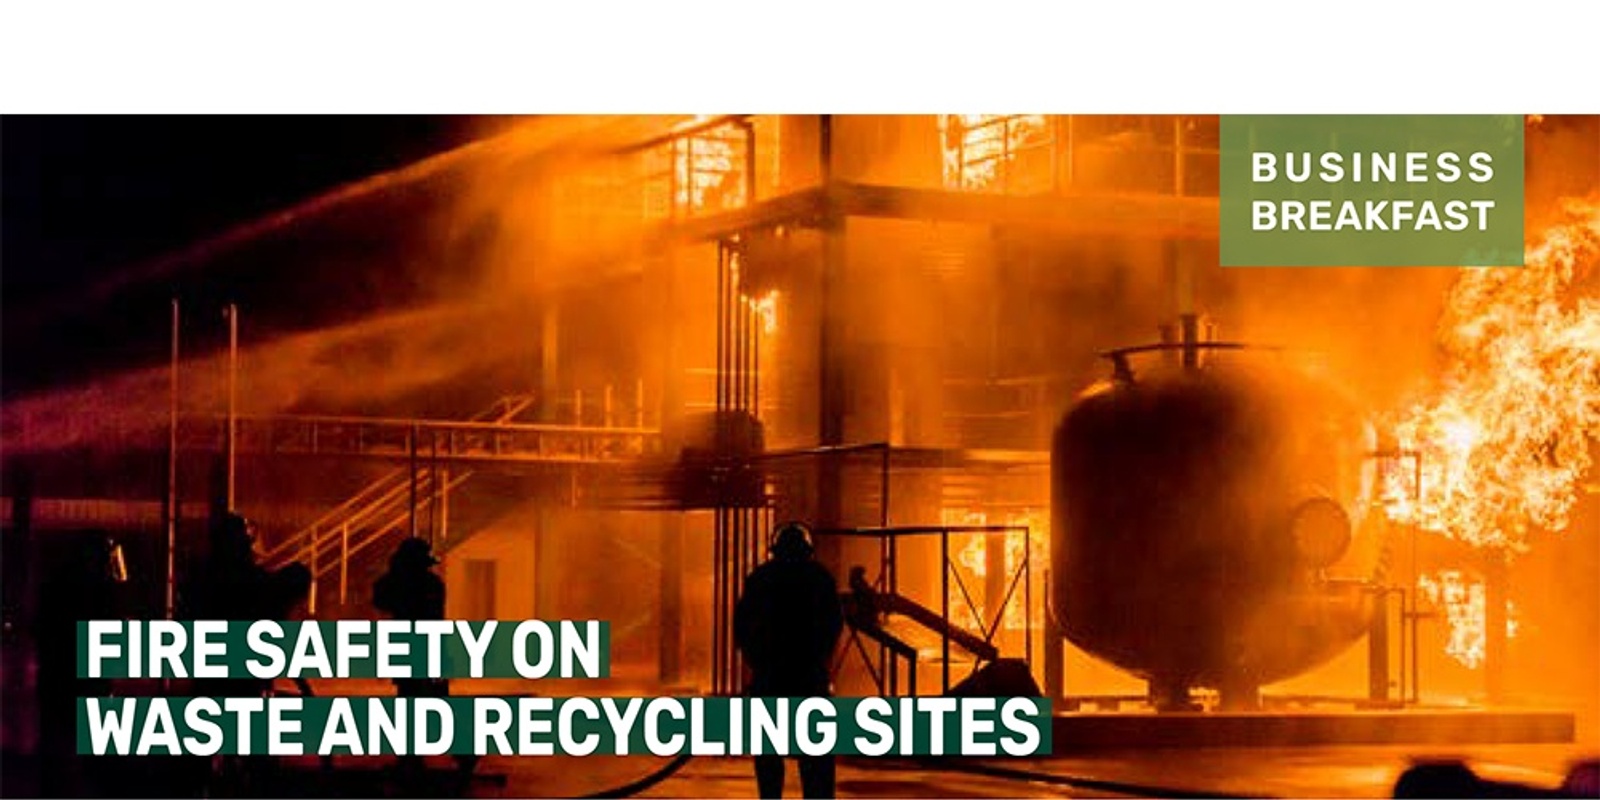 WRIQ Business Breakfast (March 2023) - Fire Safety on Waste and Recycling Sites 